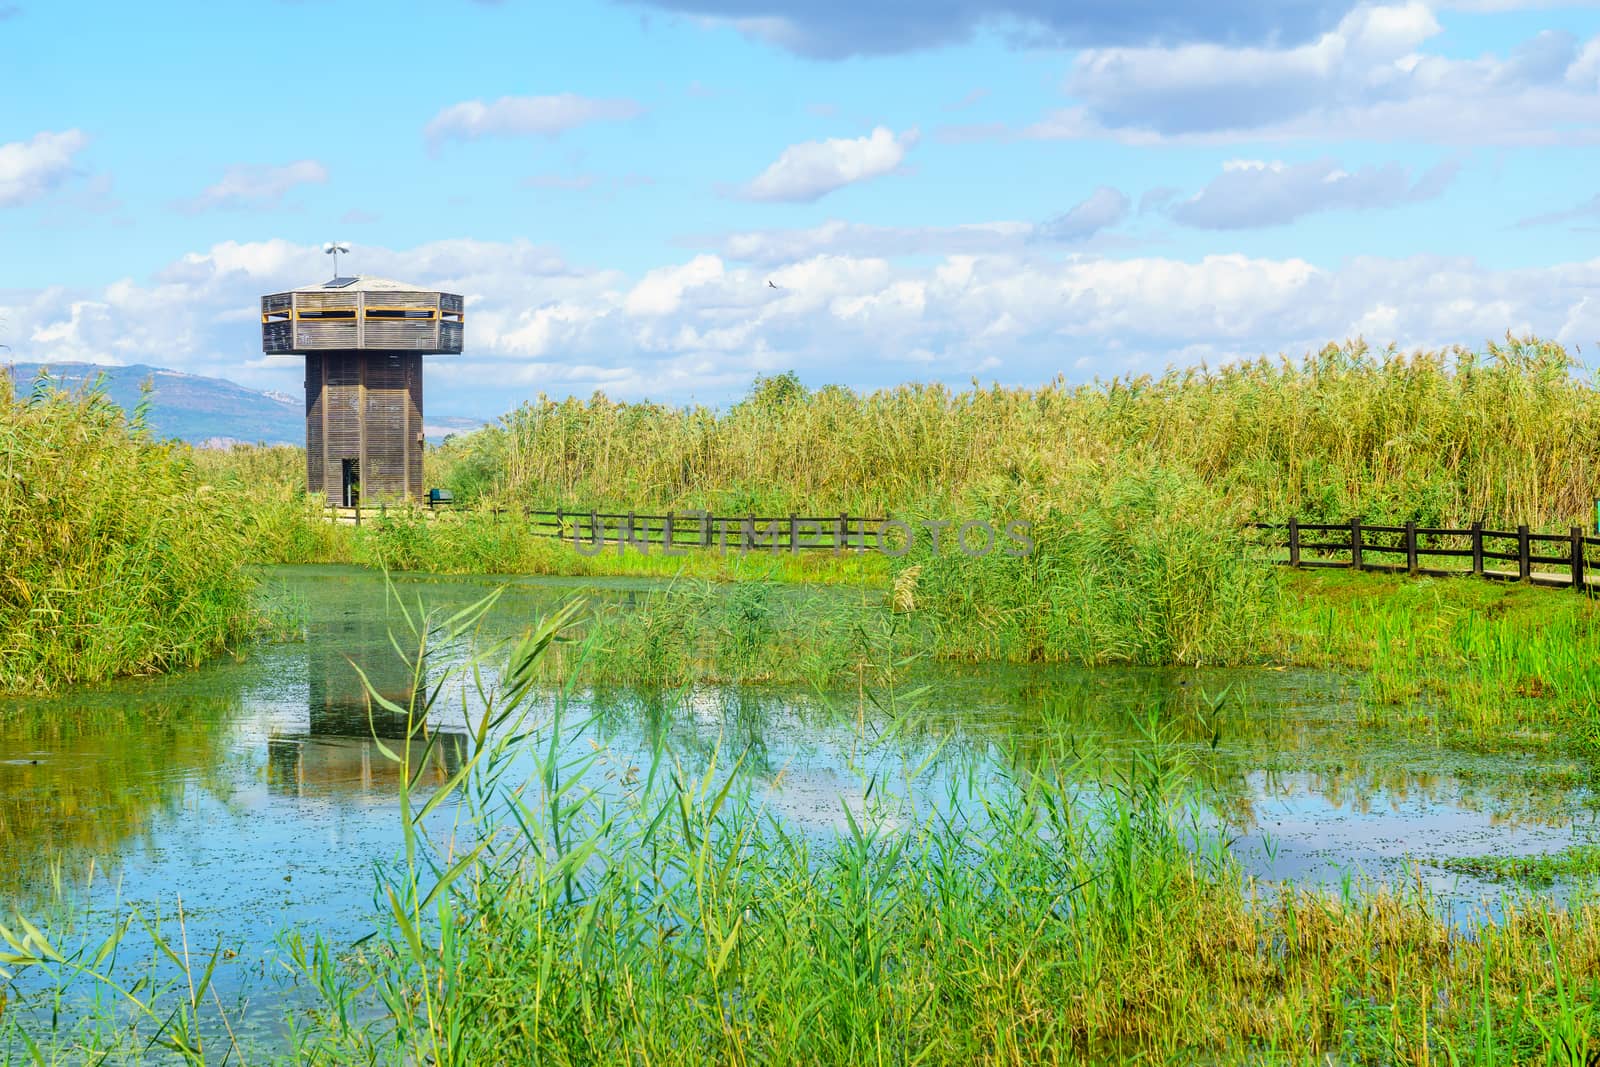 View of the observation tower, with wetland landscape, in the Hula nature reserve, northern Israel